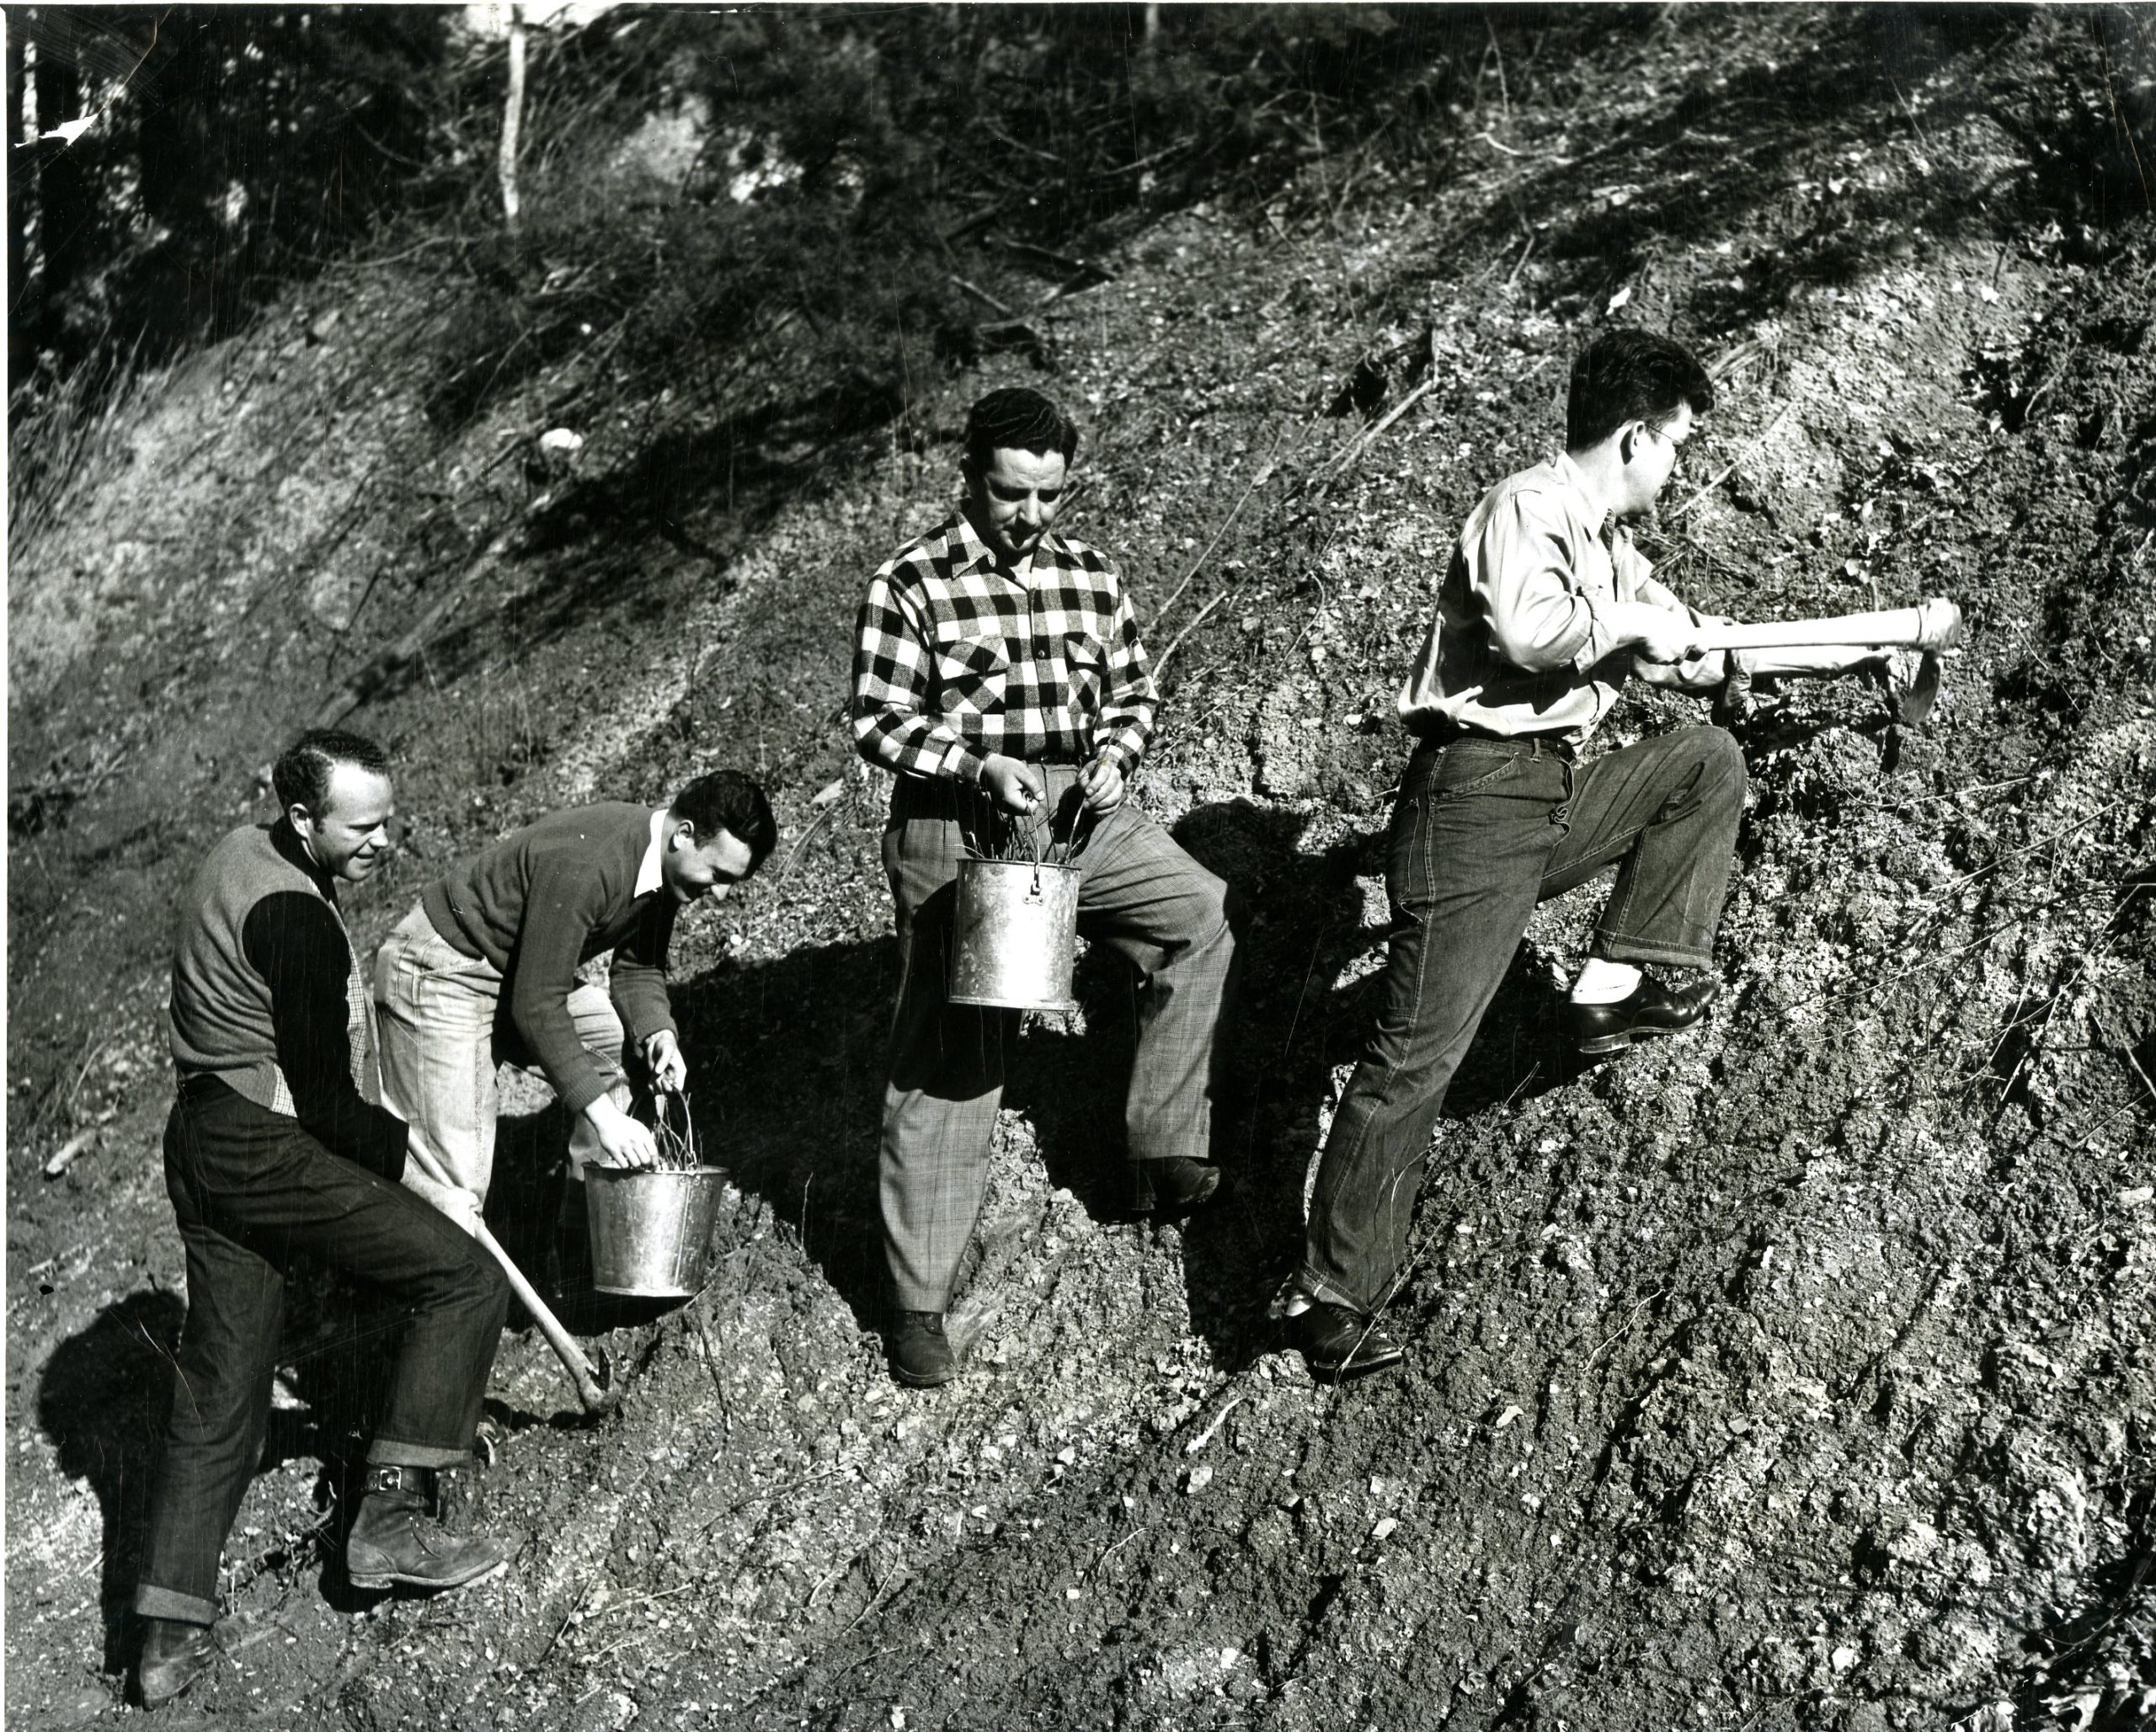 Four students with buckets and equipment on a hillside